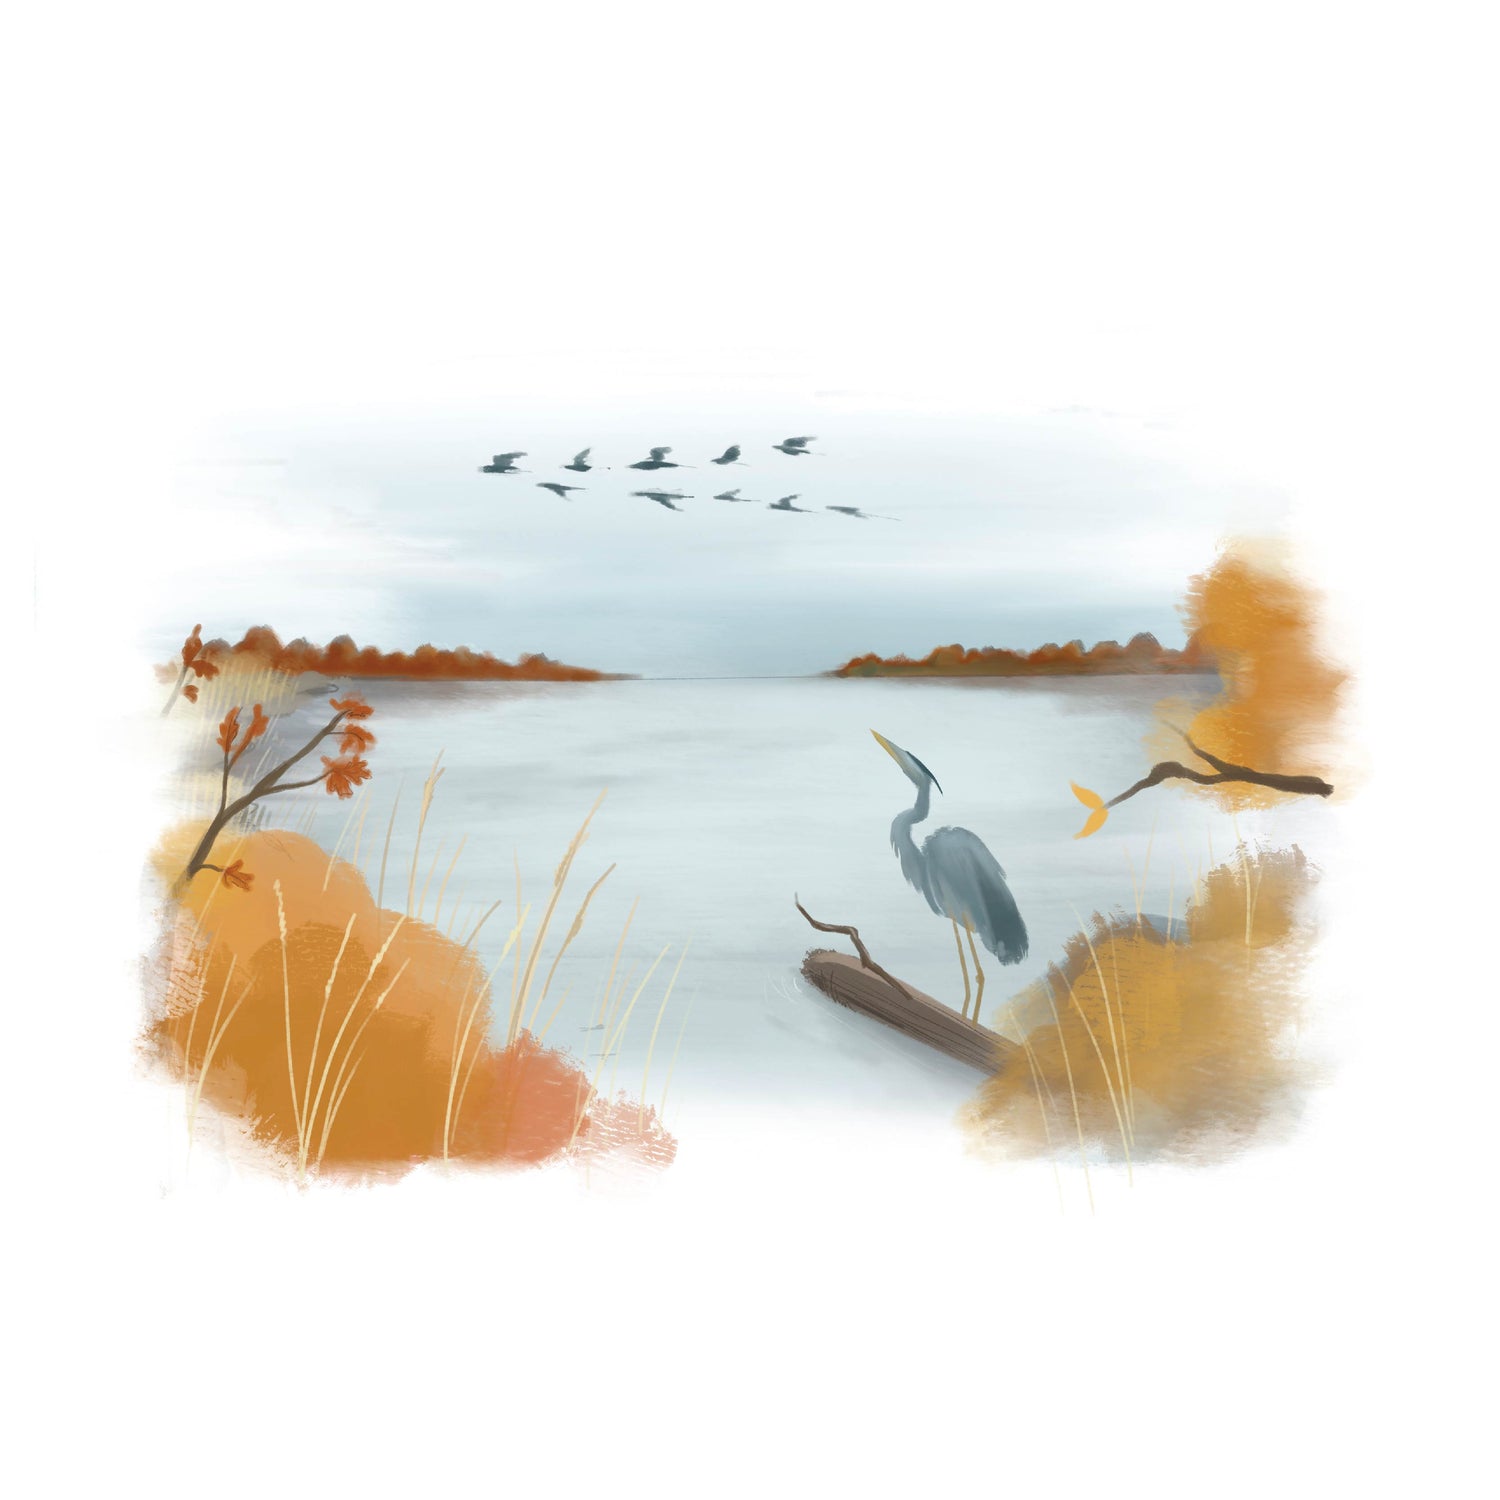 Motive of the Eastern Shore with a Heron, Fall season scent inspirations, scented candles, eastern shore, chesapeake bay, the fall homecoming.